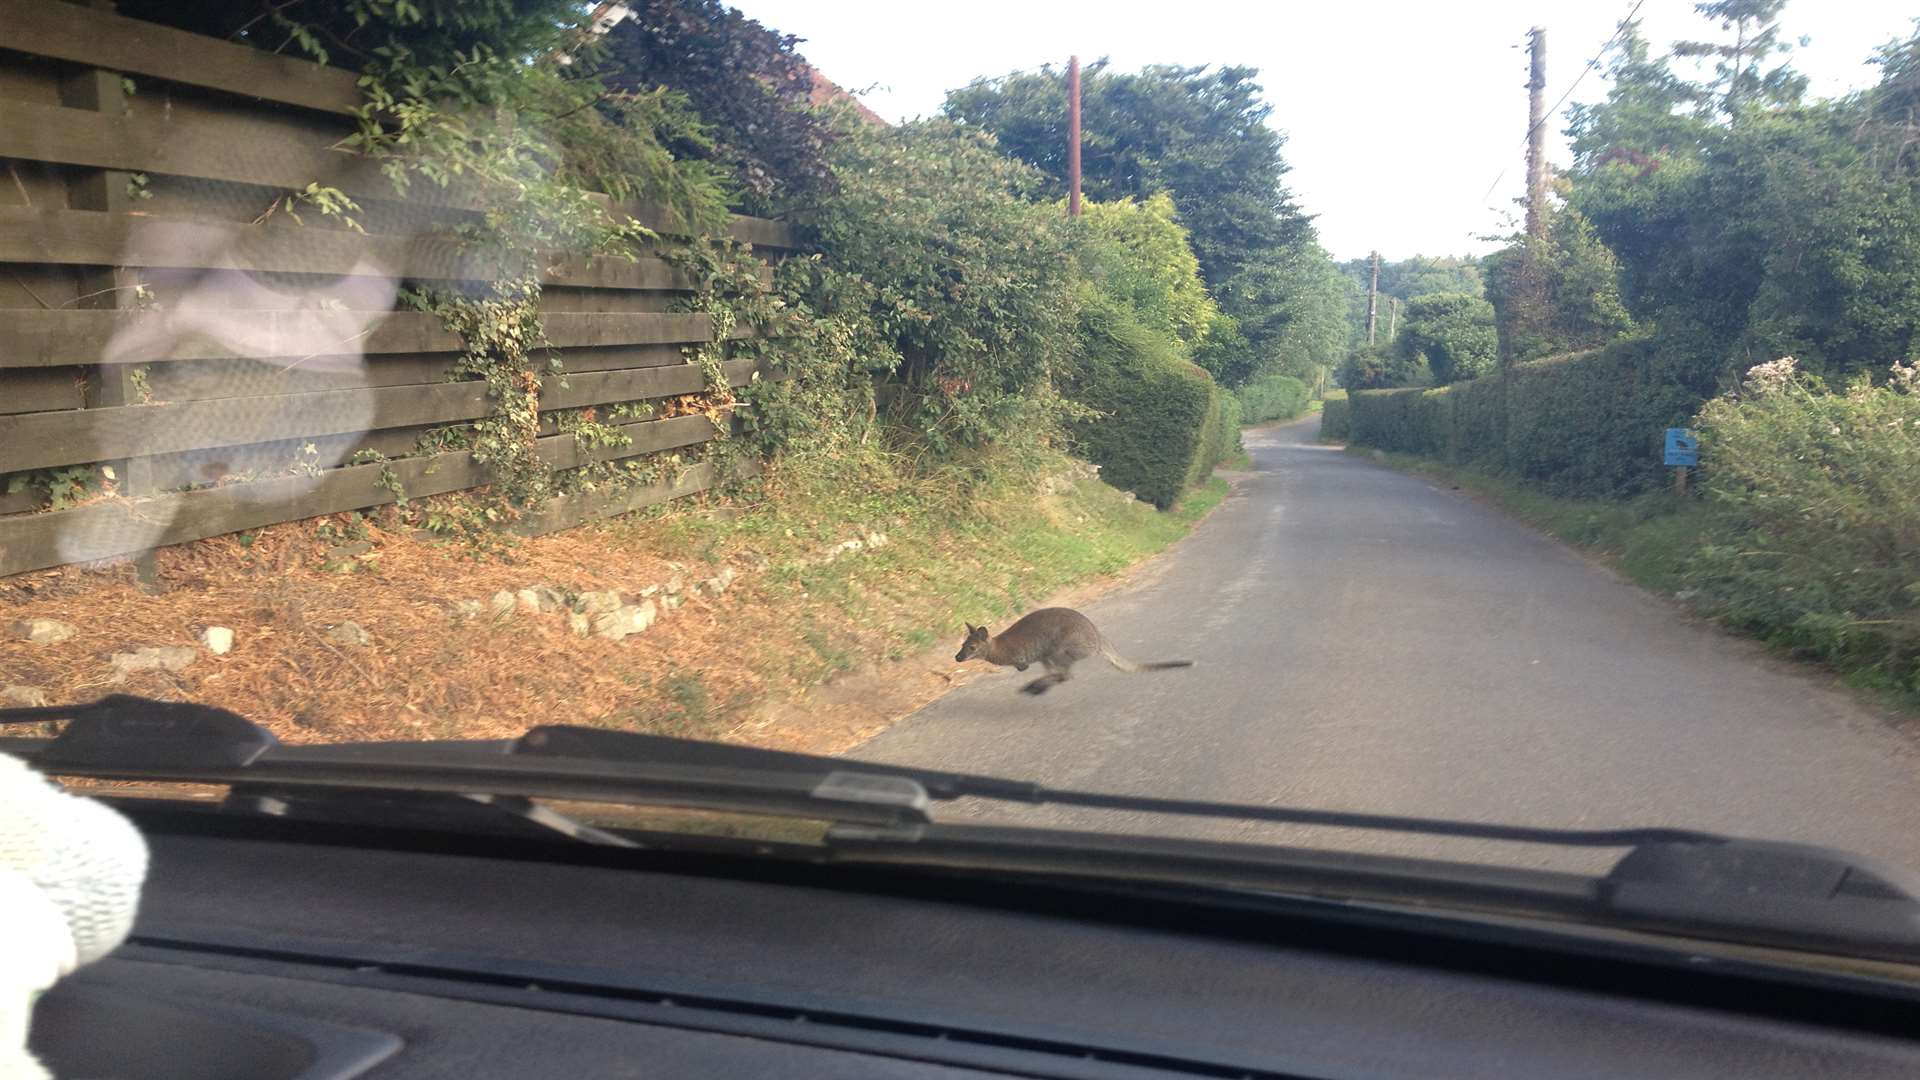 Dan Rogers spotted this wallaby in deepest, darkest... Bearsted!